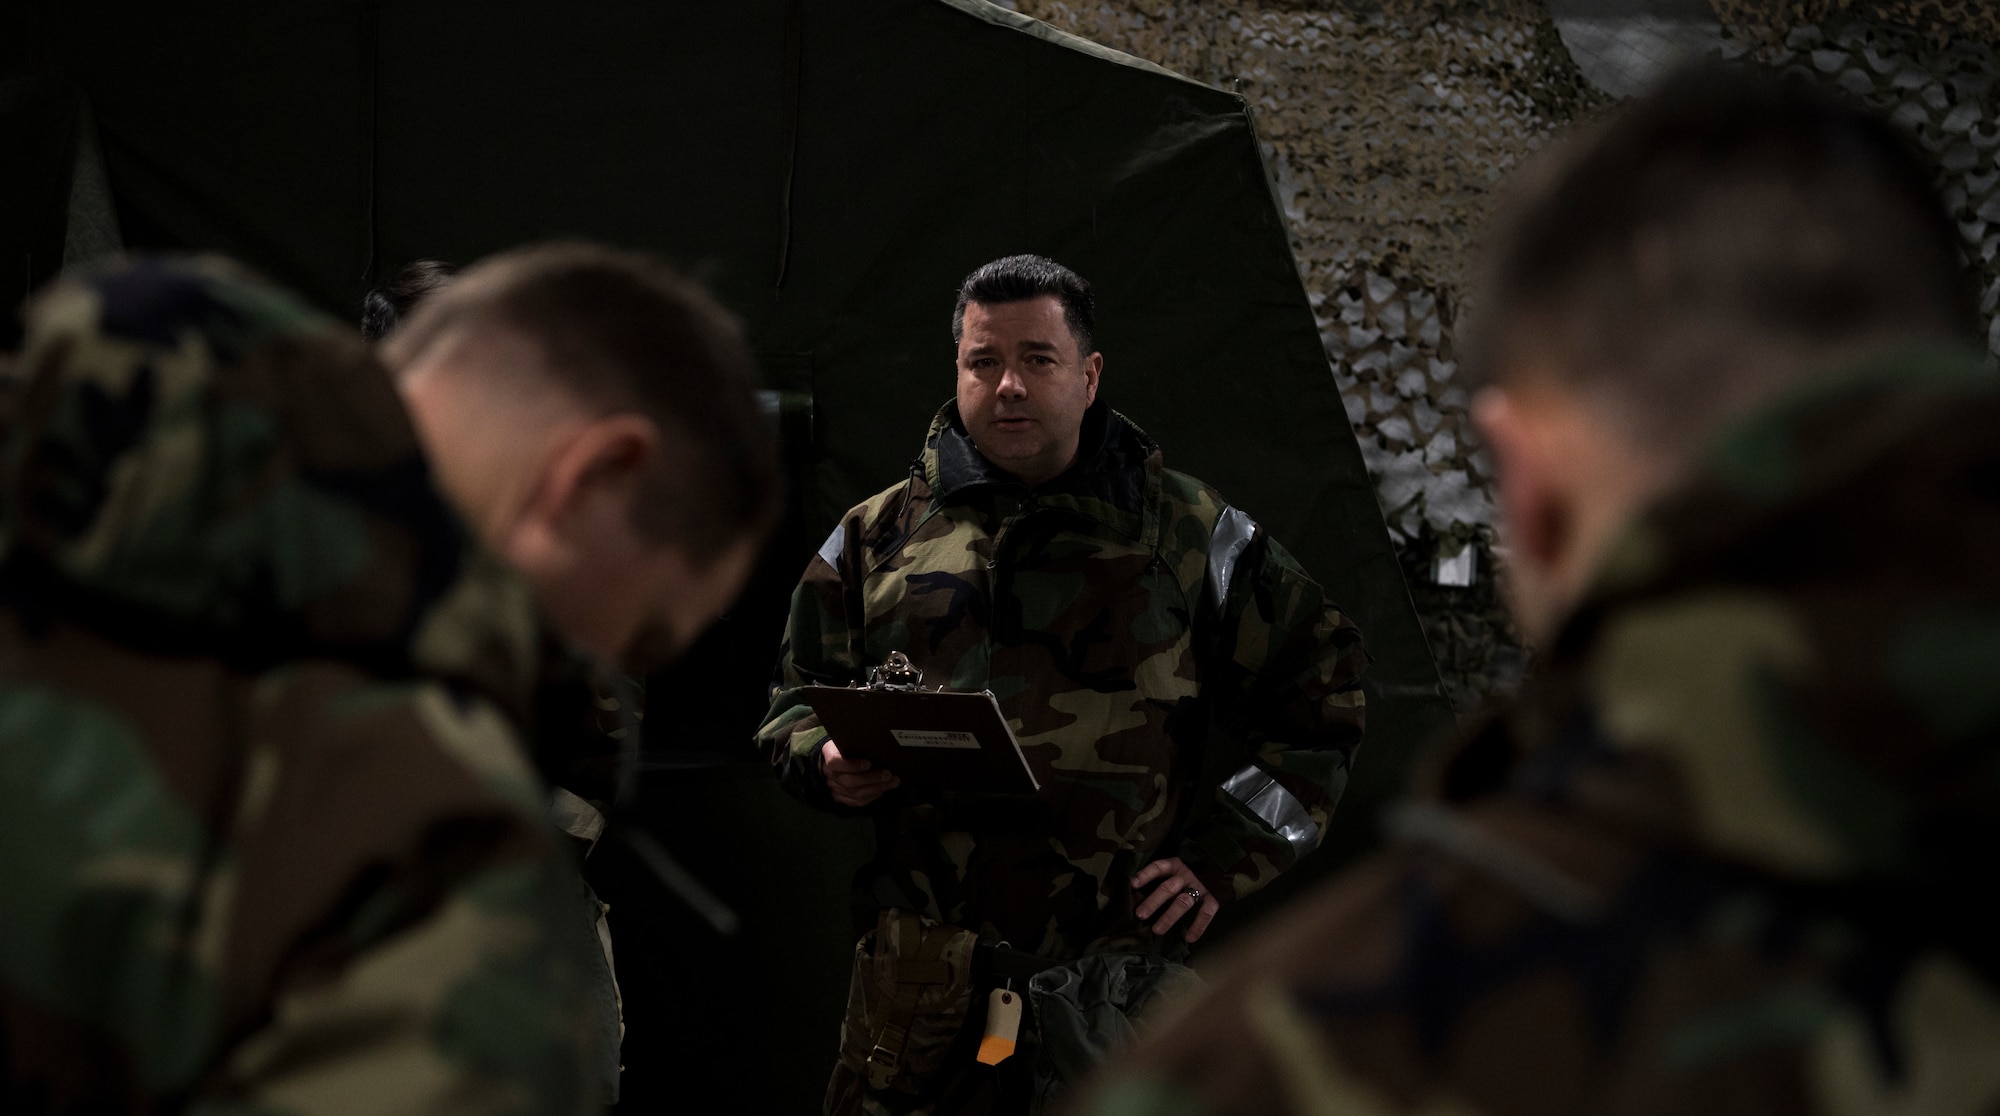 U.S. Air Force Master. Sgt. Joseph Connolly, 732nd Air Mobility Squadron superintendent of air freight operations, directs classmates on proper procedures during a newly-implemented chemical, biological, radiological and nuclear defense training course drill at Joint Base Elmendorf-Richardson, Alaska, Jan. 8, 2019. One of the key changes made embraces the reintegration of hands-on, in-person instruction, and reduces computer based training, allowing Airmen to receive a more tailored learning experience. (U.S. Air Force photo by Airman 1st Class Crystal A. Jenkins)